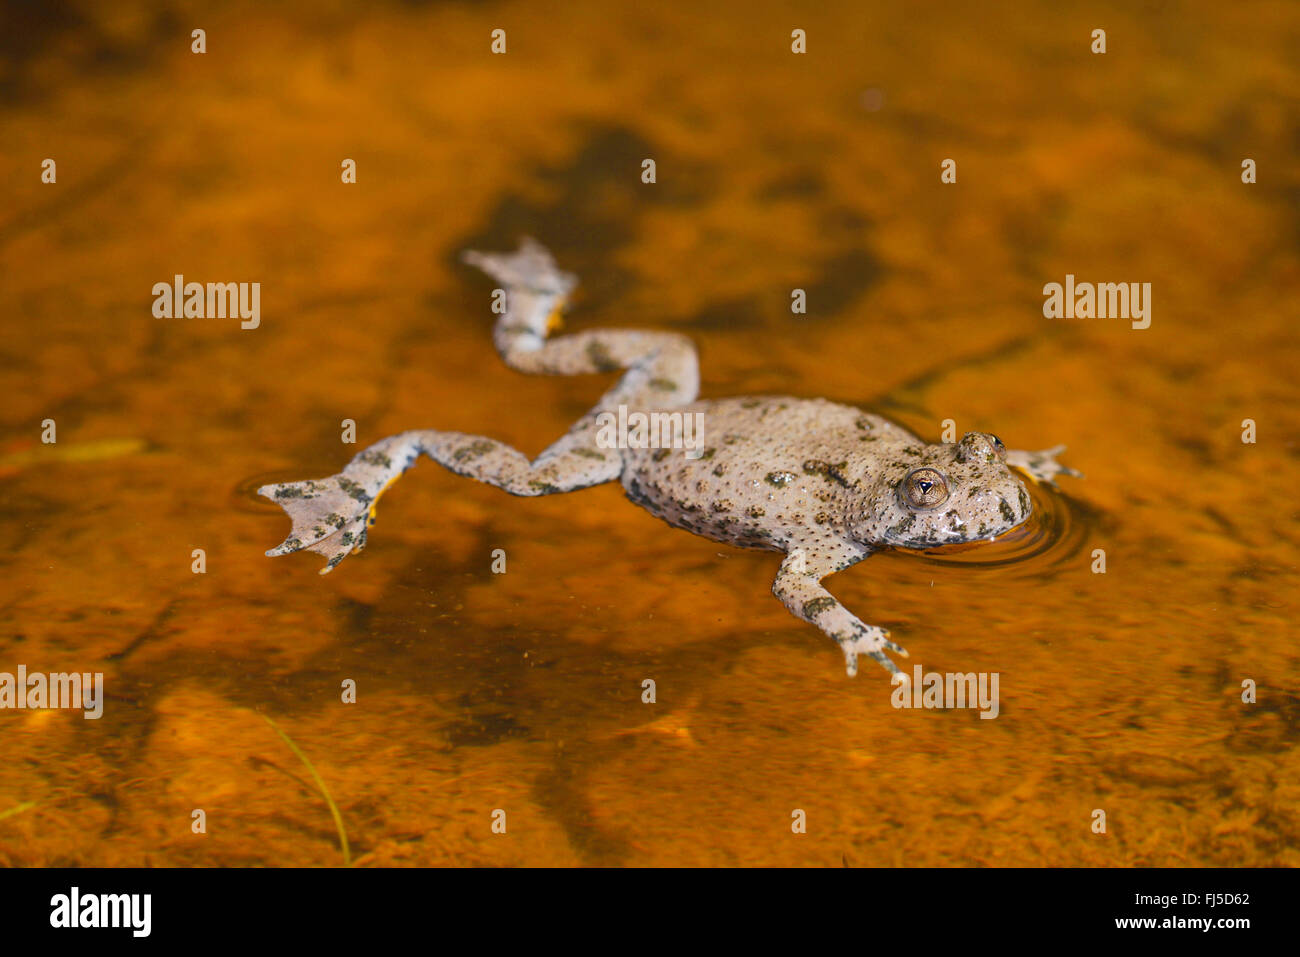 yellow-bellied toad, yellowbelly toad, variegated fire-toad (Bombina variegata), yellow-bellied toad floating on the surface of a puddle, Germany, Lower Saxony Stock Photo